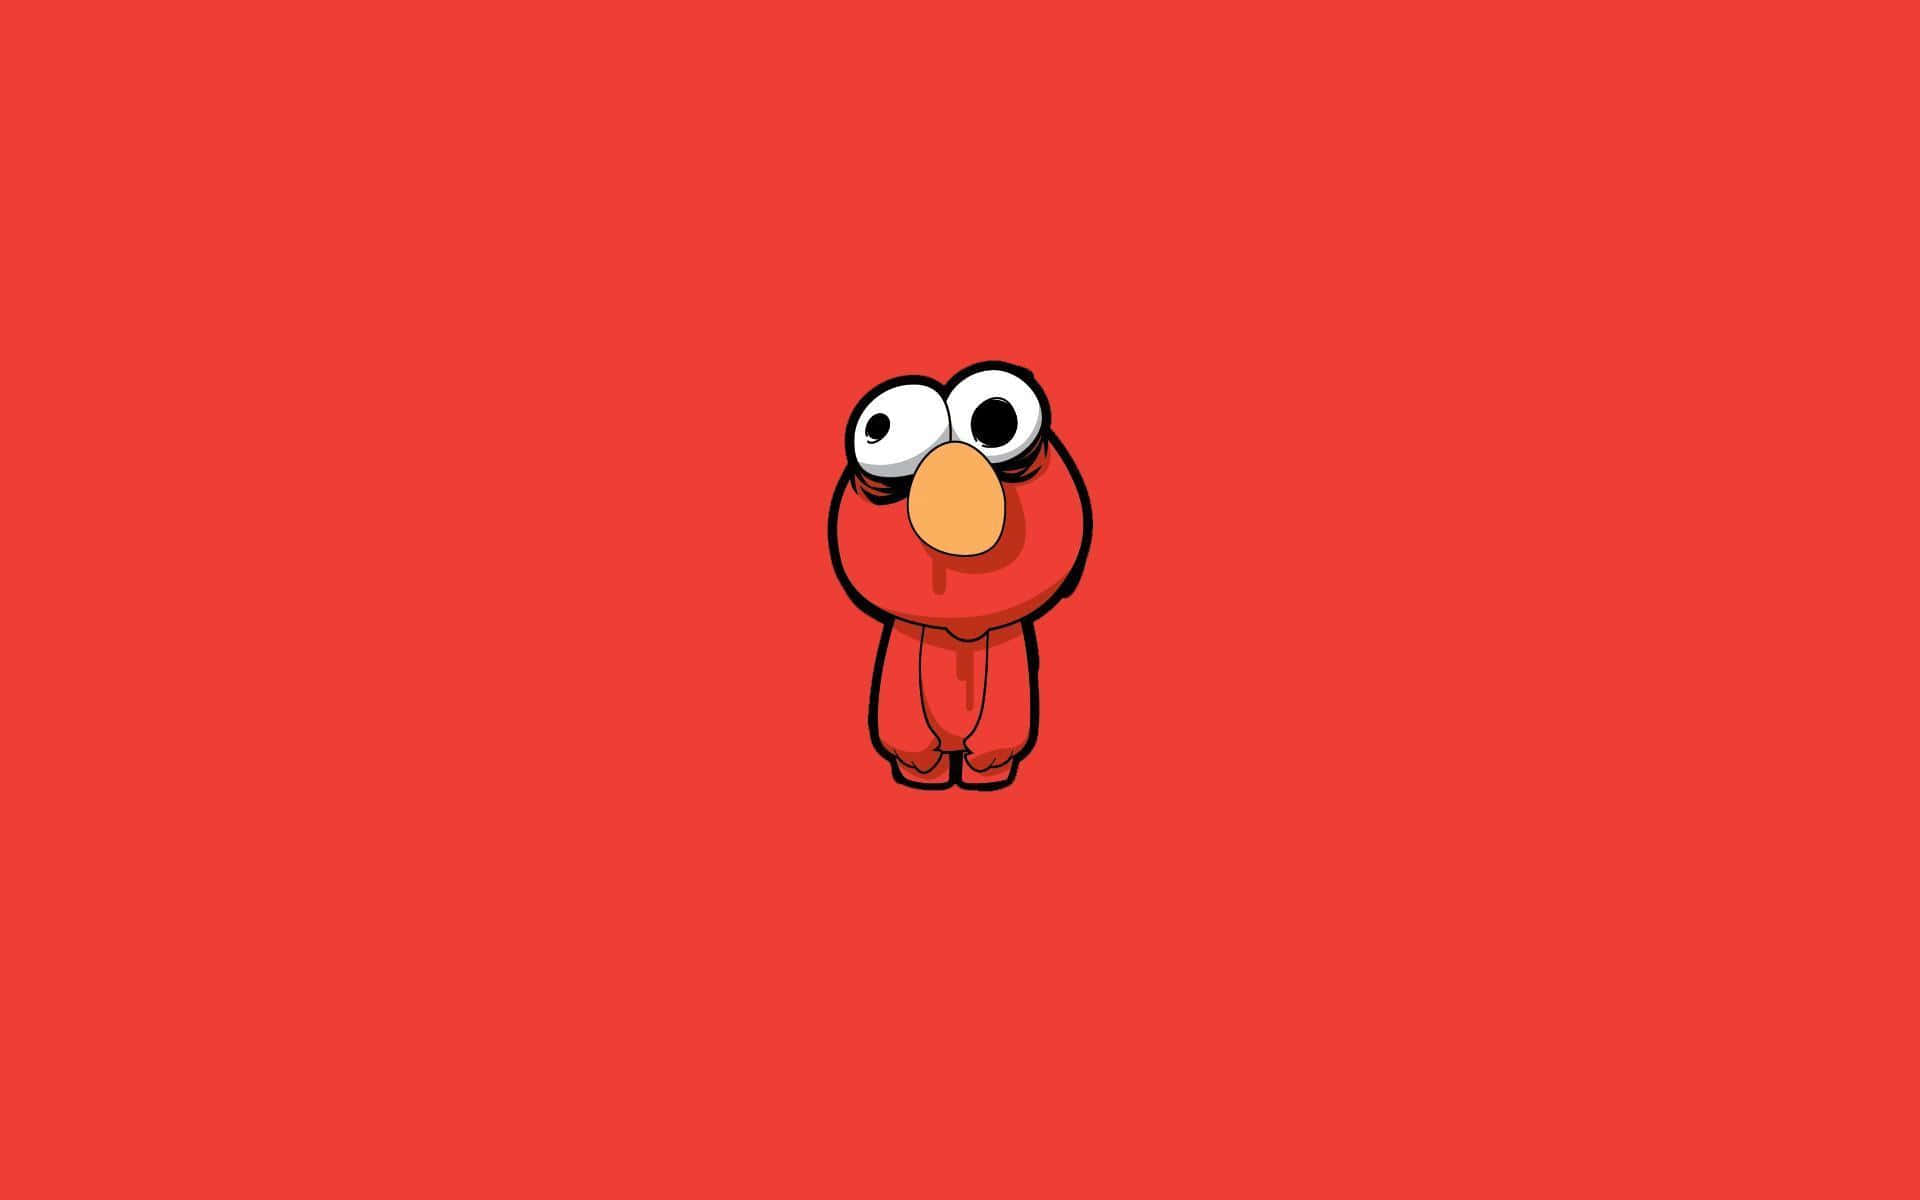 Elmo smiling against a colorful abstract background